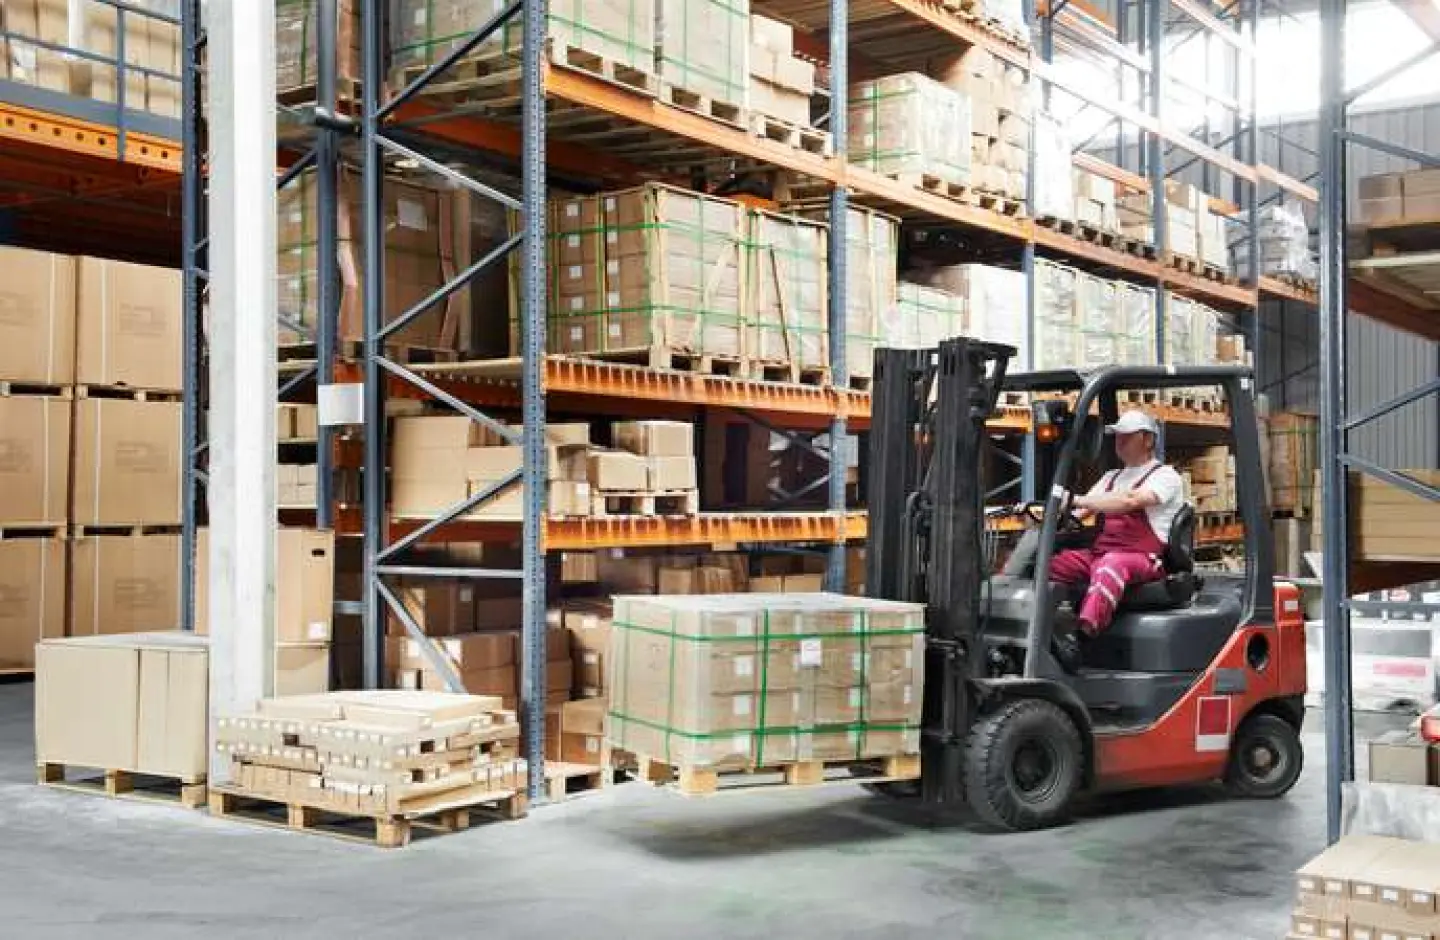 Image of a forklift in action inside a warehouse.